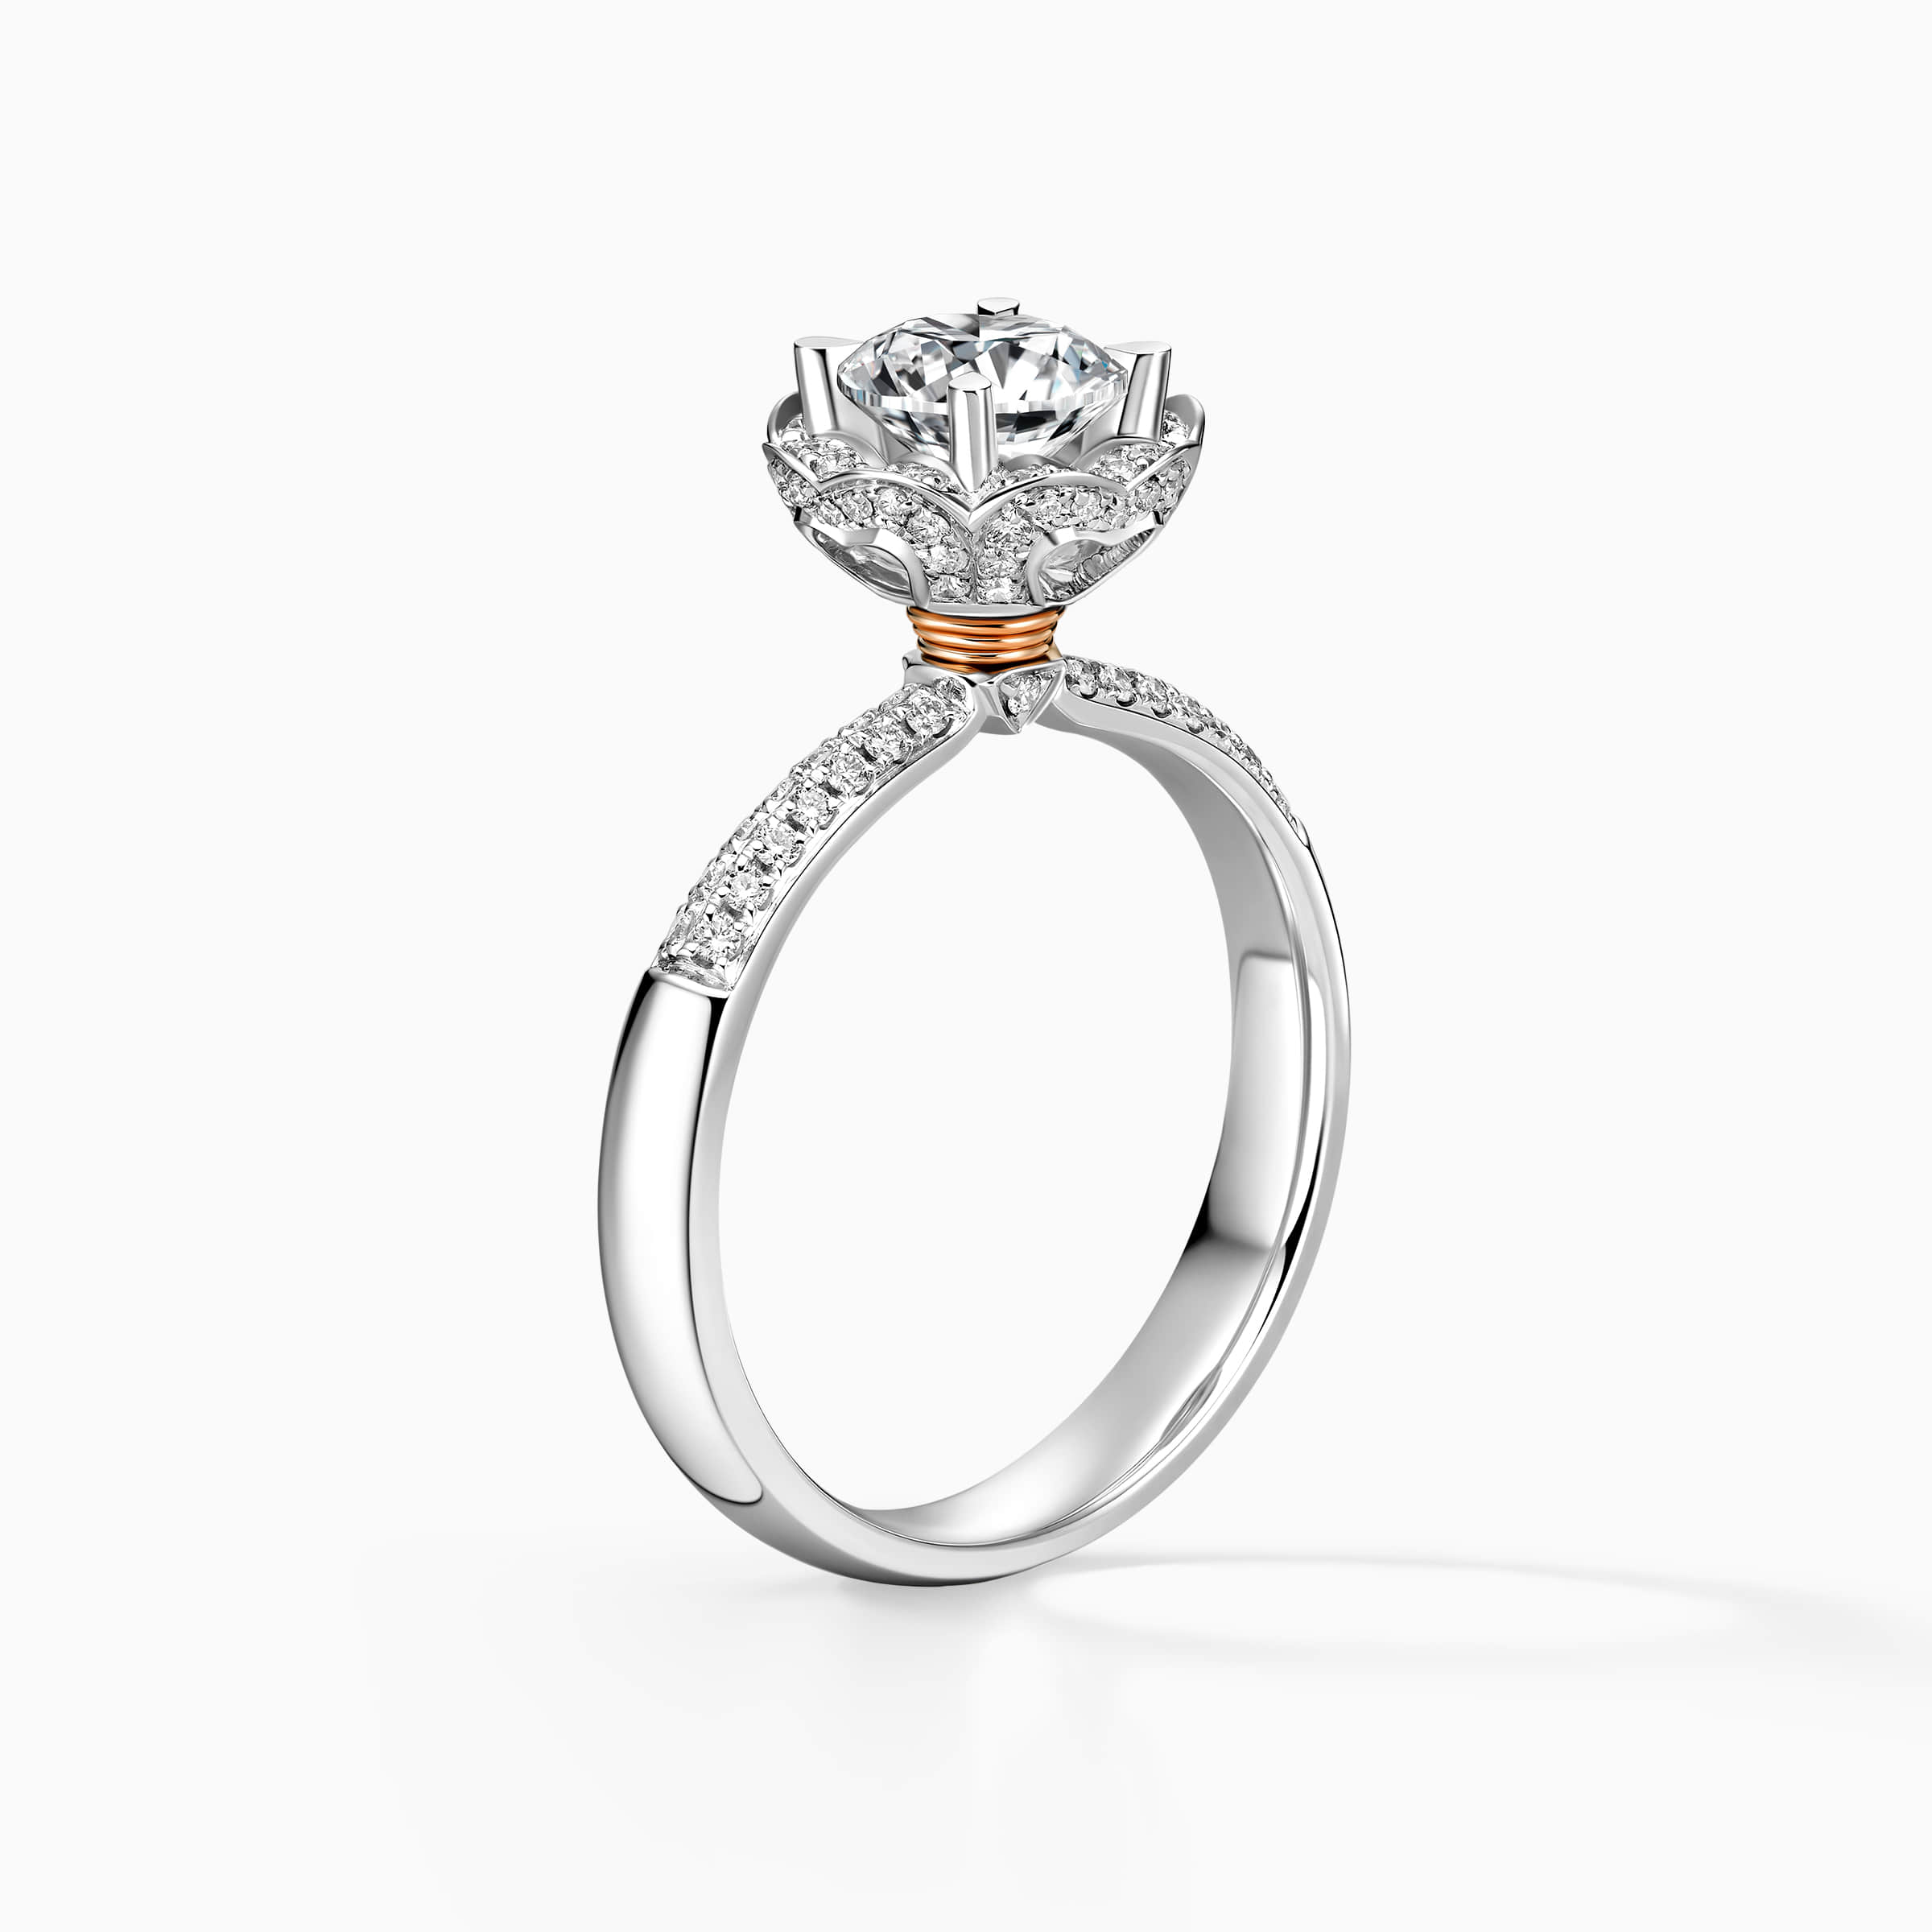 Darry Ring designer engagement ring side view